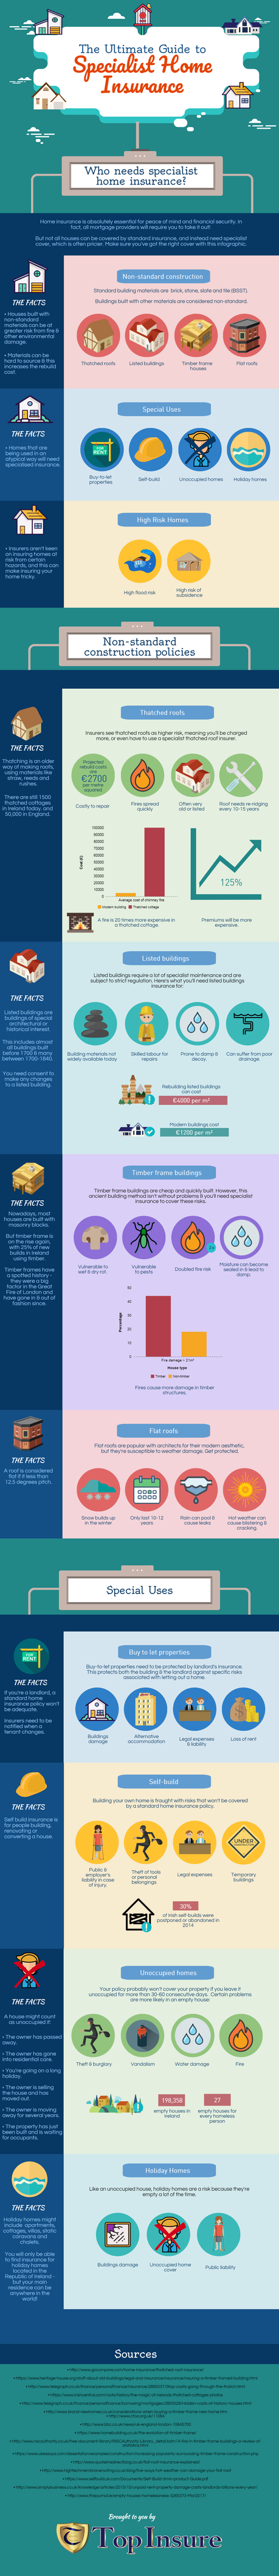 Specialist Home Insurance infographic (final)